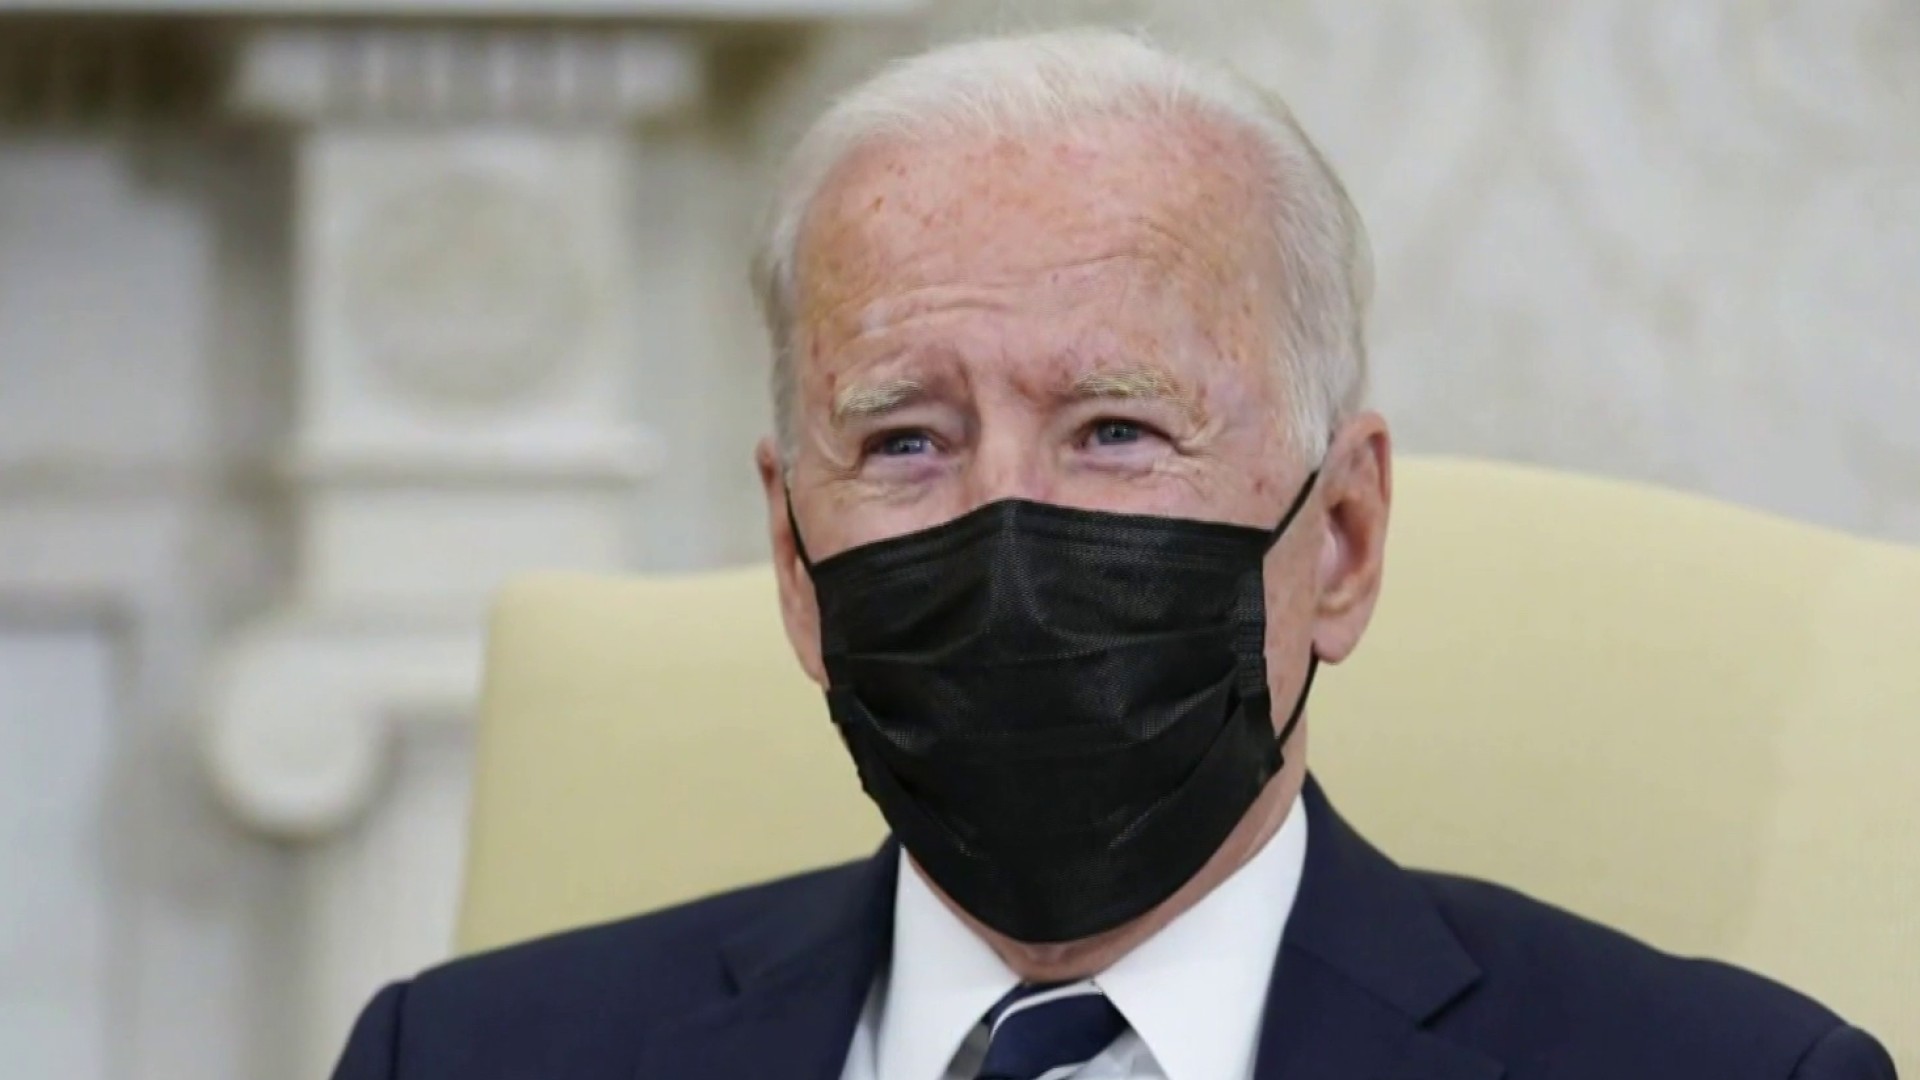 Biden’s vaccine mandate for companies temporarily halted by federal appeals